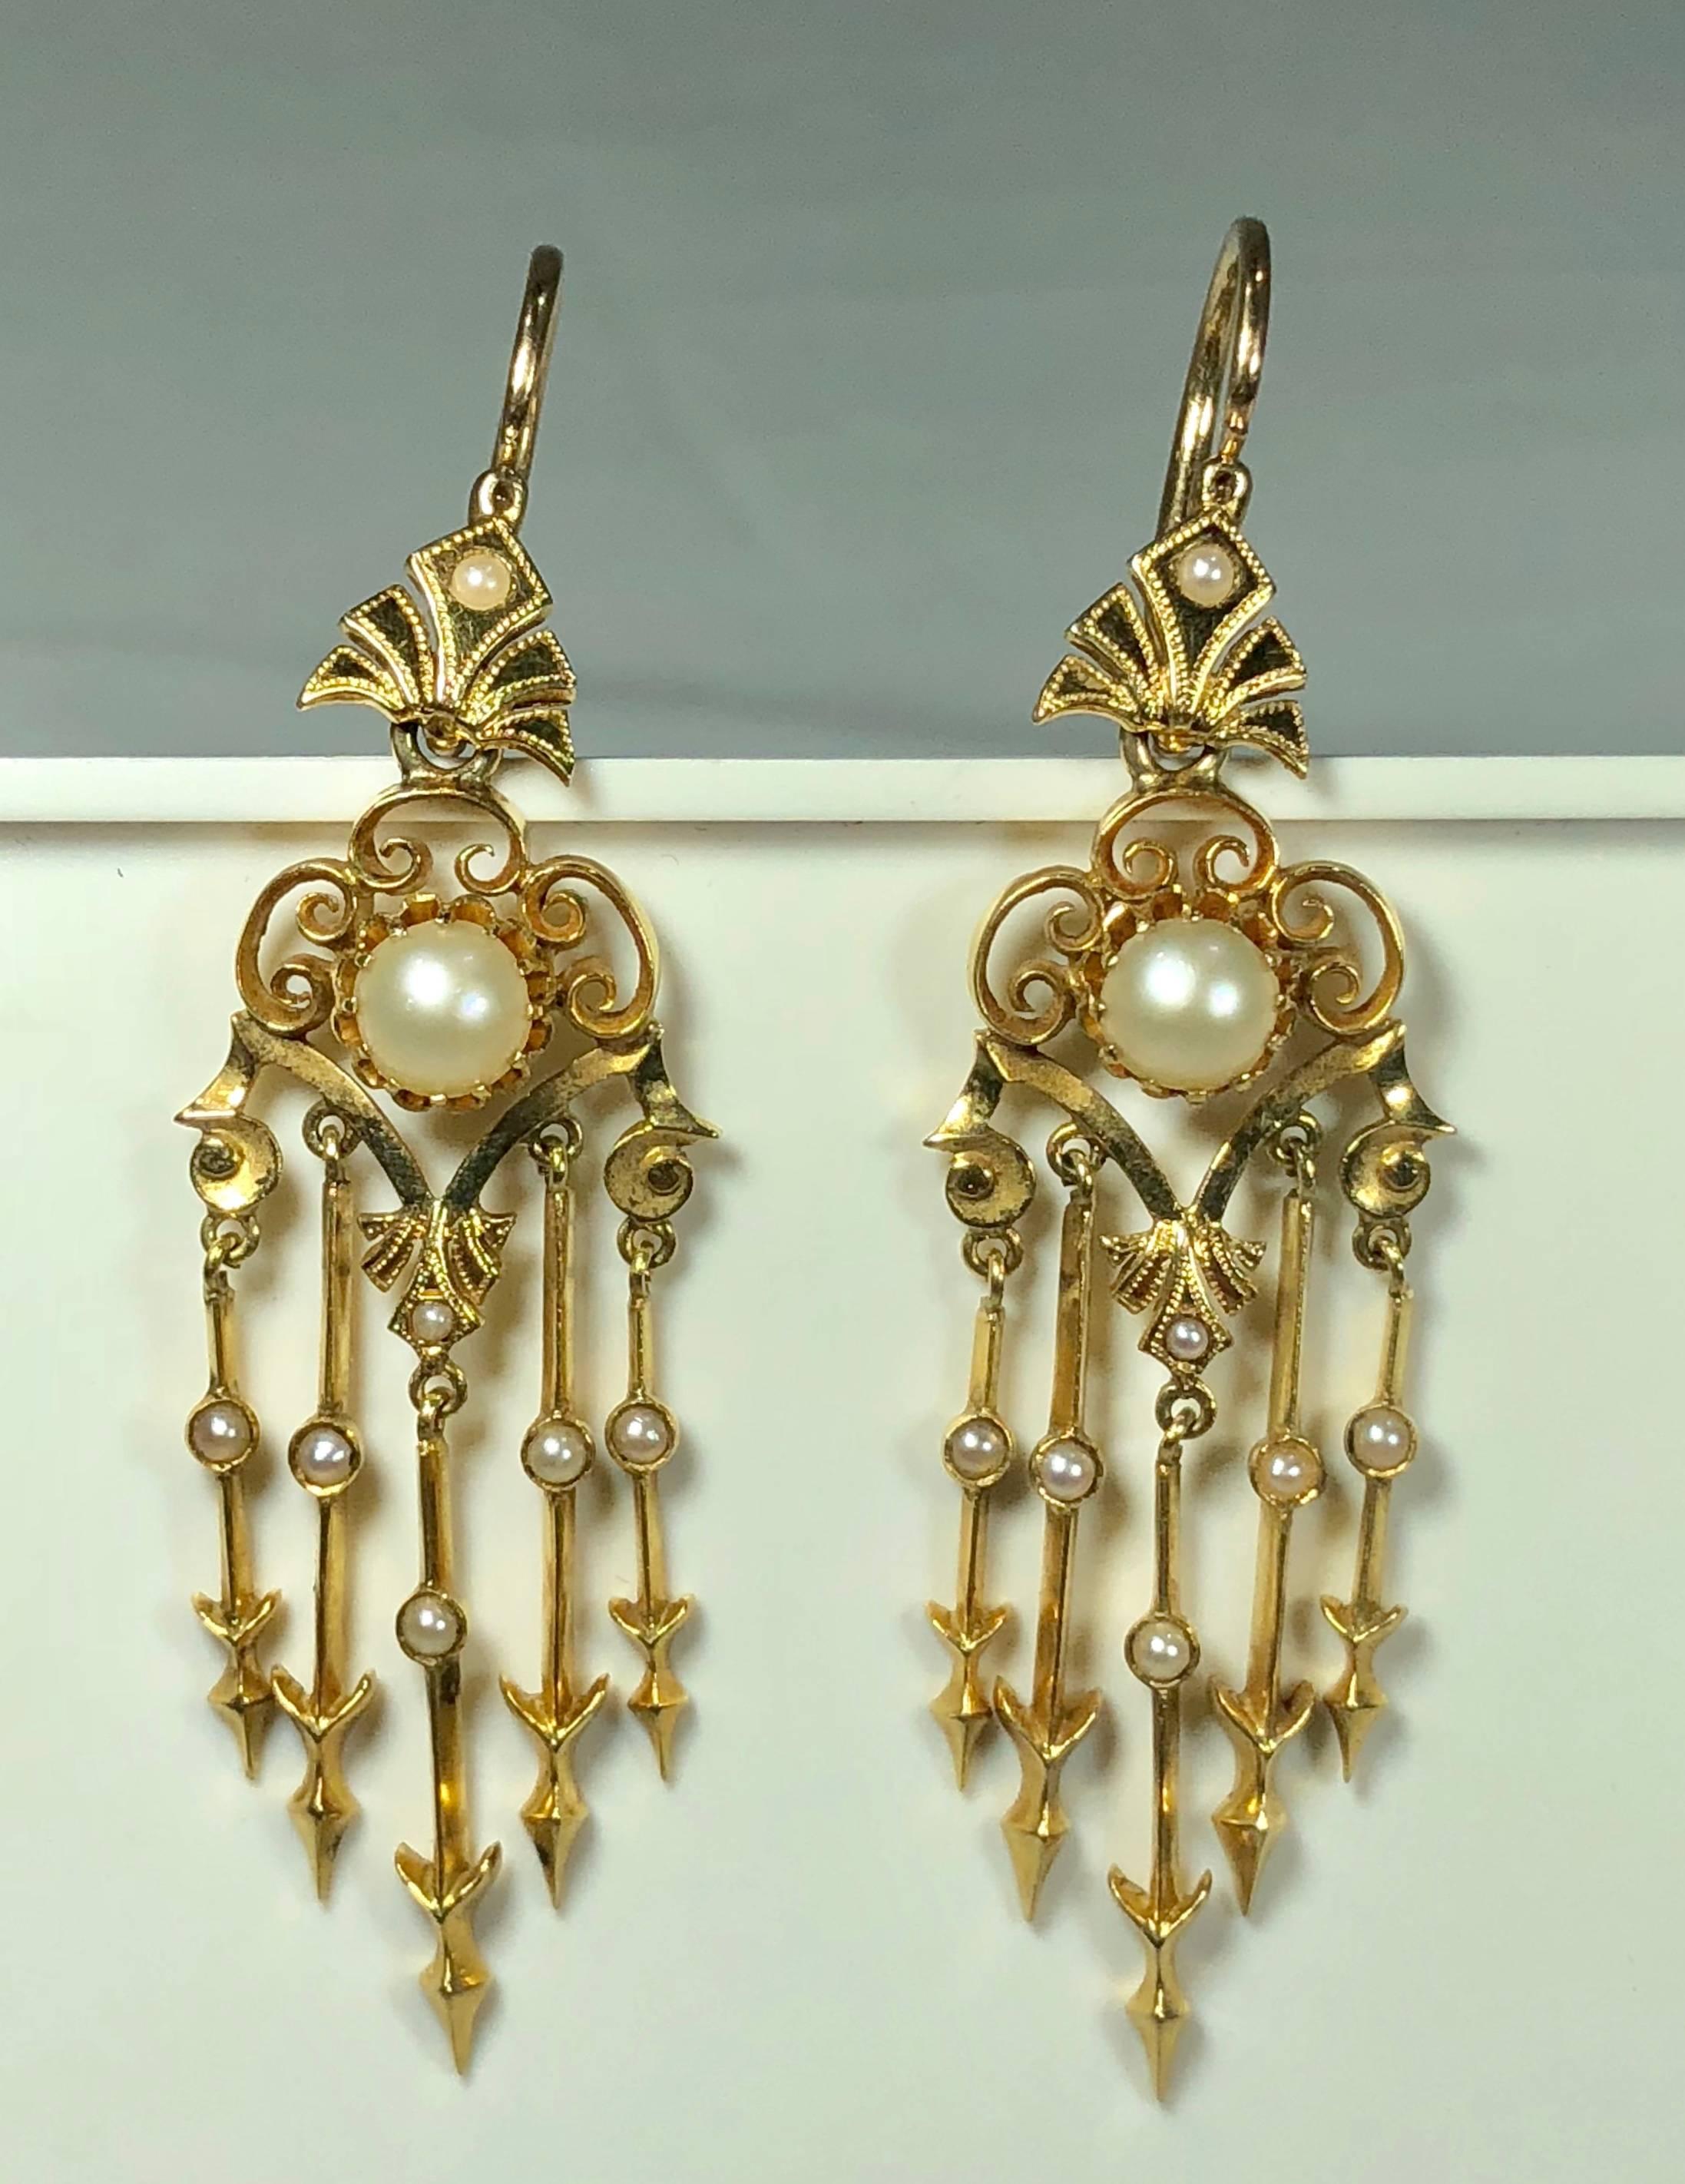 Antique Victorian 18 karat natural pearl and seed pearl chandelier earrings. These stunning Victorian true antique earrings are created in 18 karat (tests 18 Karat), yellow gold. The rich yellow orange bright gold has such a beautiful patina, the